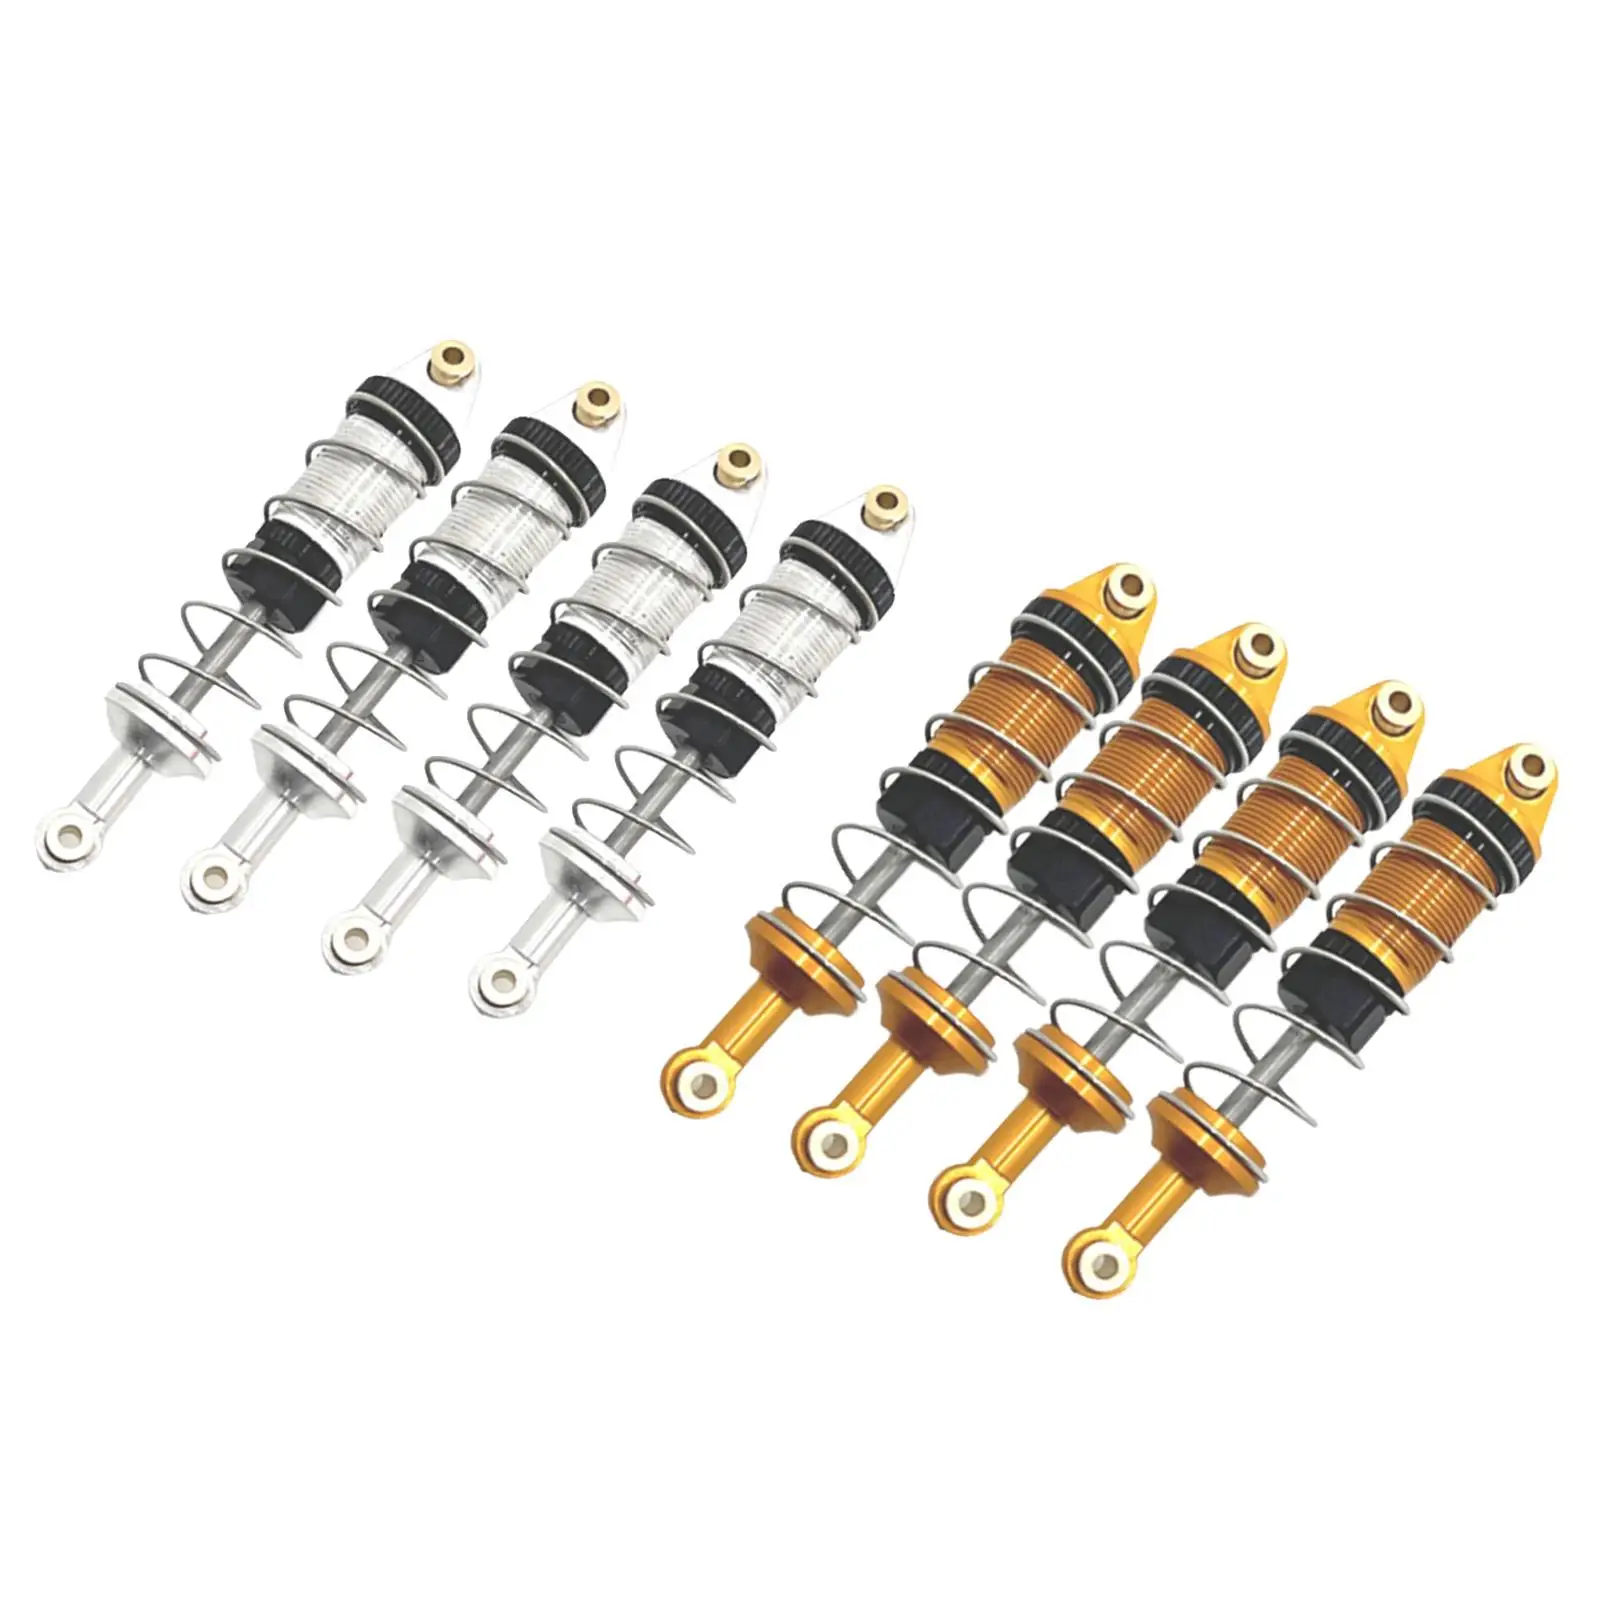 4 Pieces RC Car Shock Absorber Front and Rear RC Shocks Damper Upgrade Parts for 16207 16210 H6 1:16 Vehicles RC Car